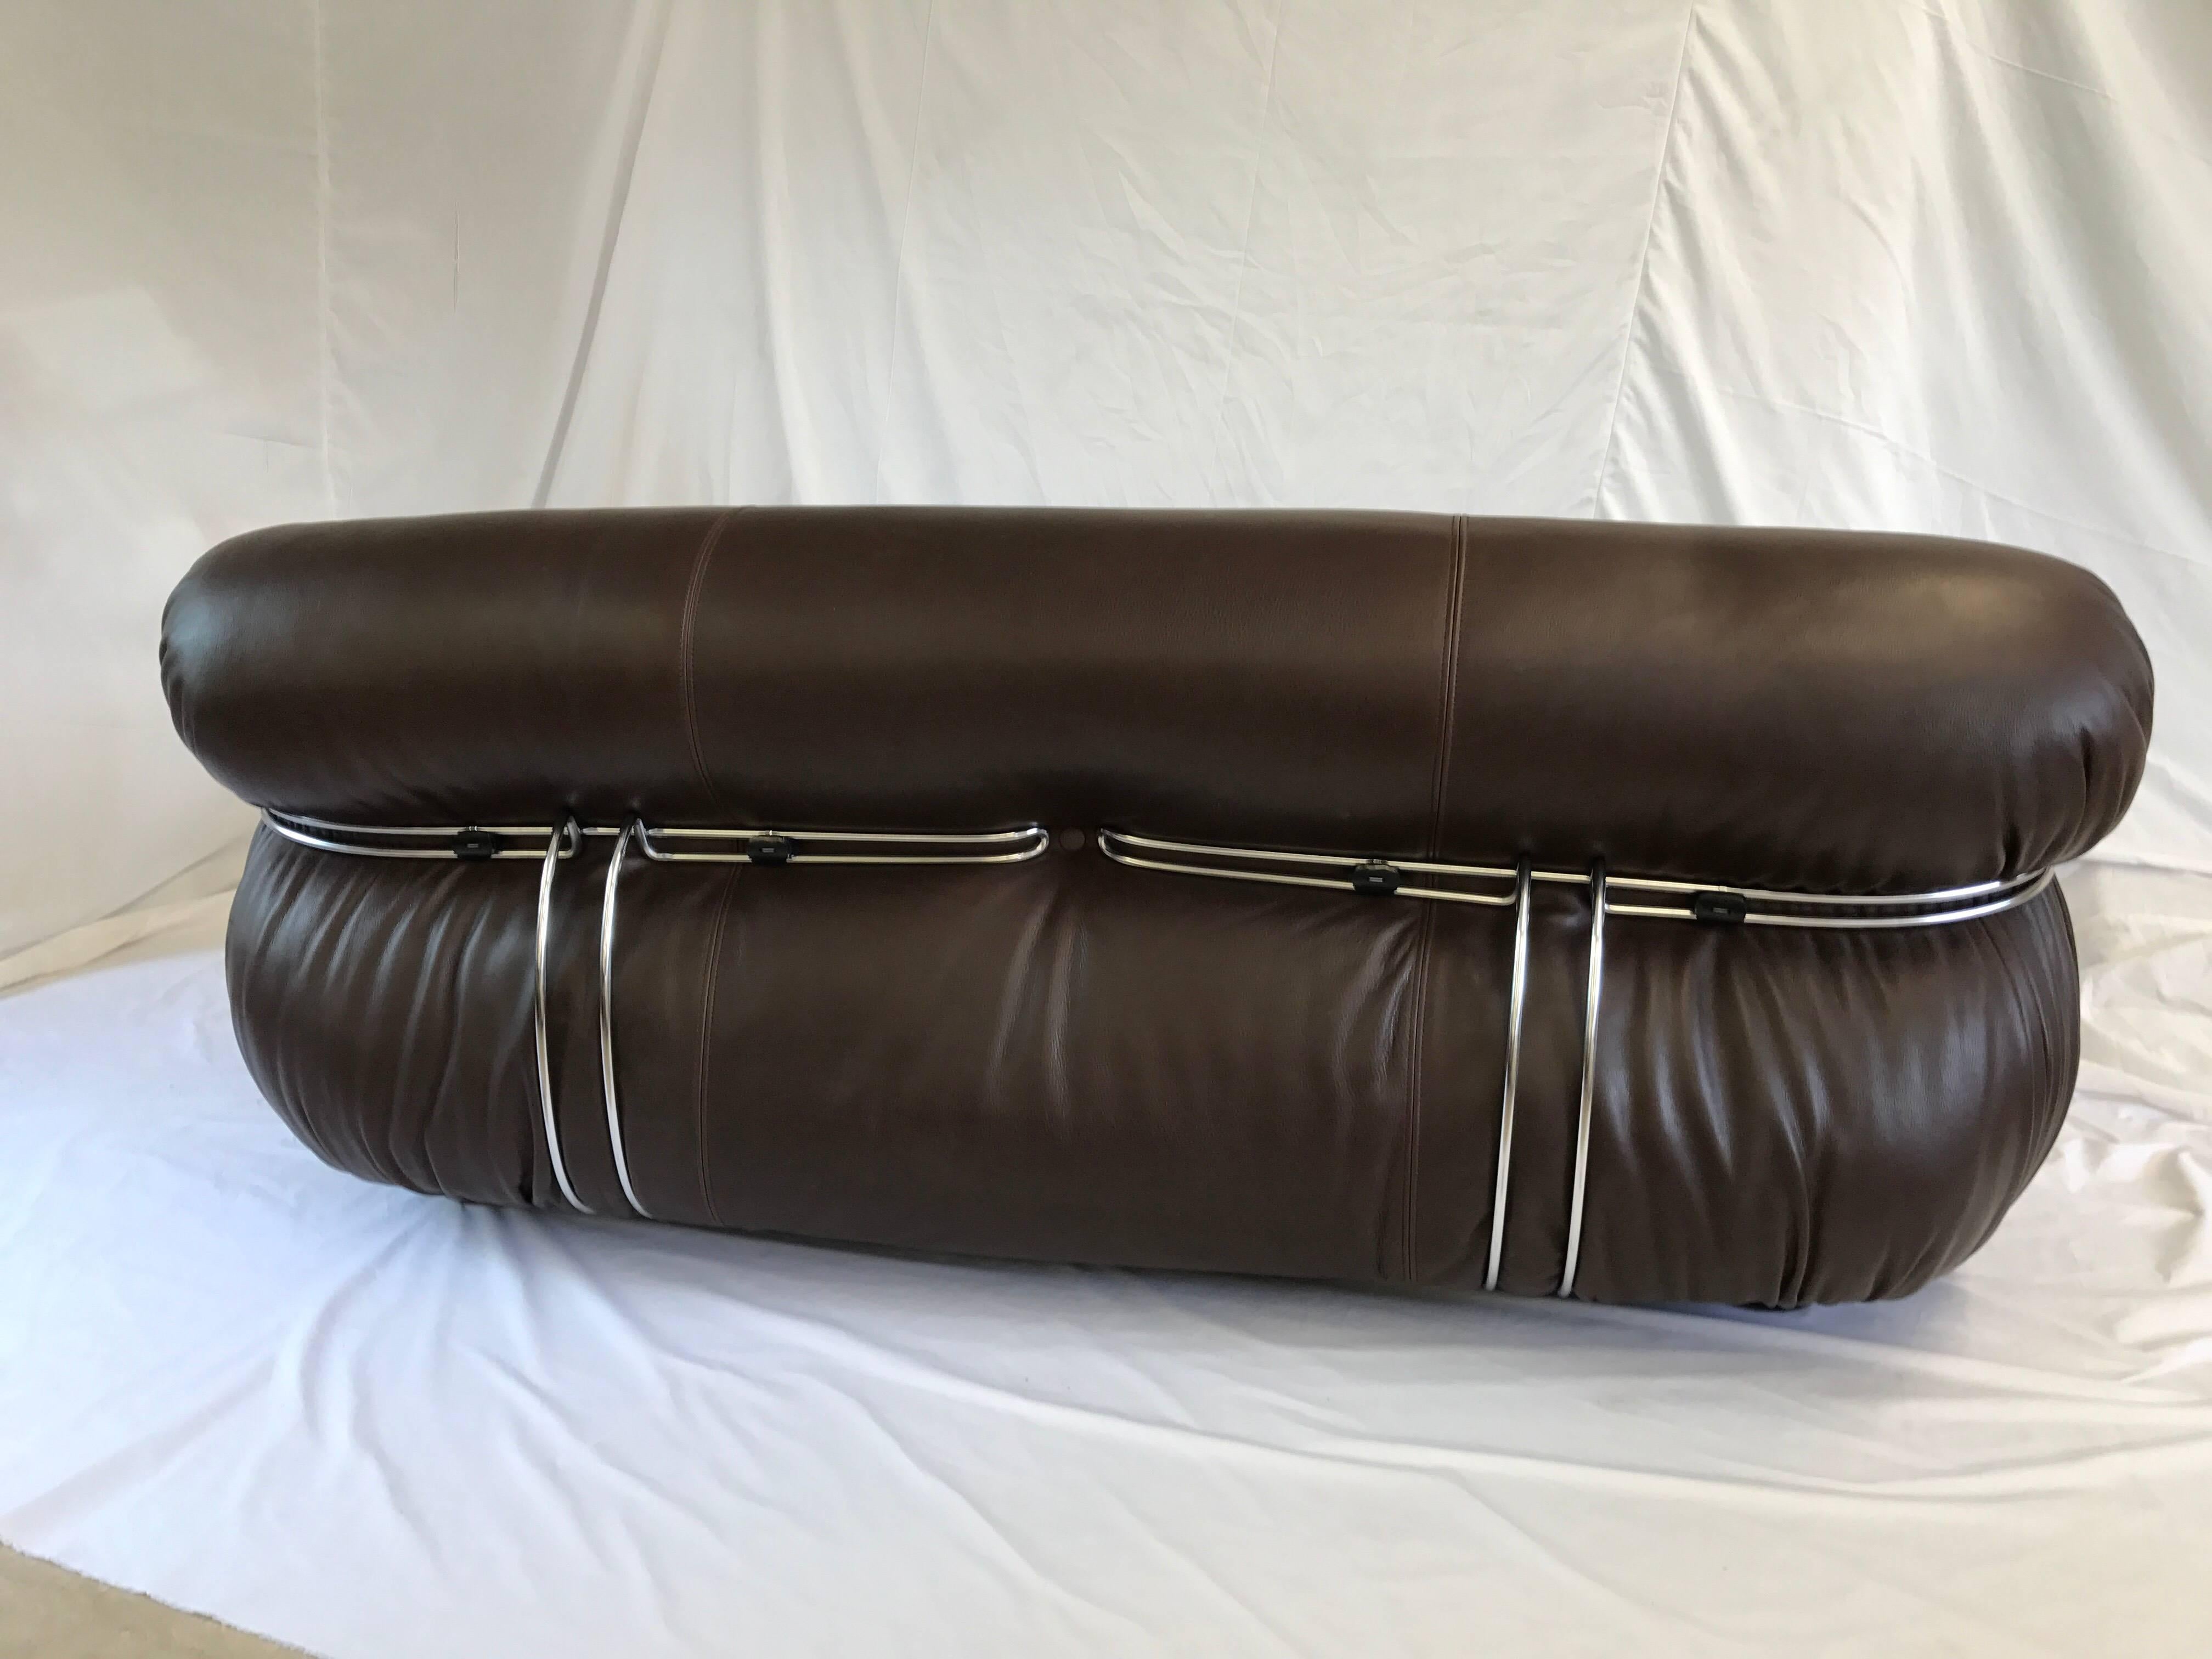 Soriana Sofa design Tobia Scarpa 1970s manufactured by Cassina. This medium version sofa with two front metal clamps will be sold with brand new leather or velvet upholstery.  The leather we use is a full natural leather of the highest quality